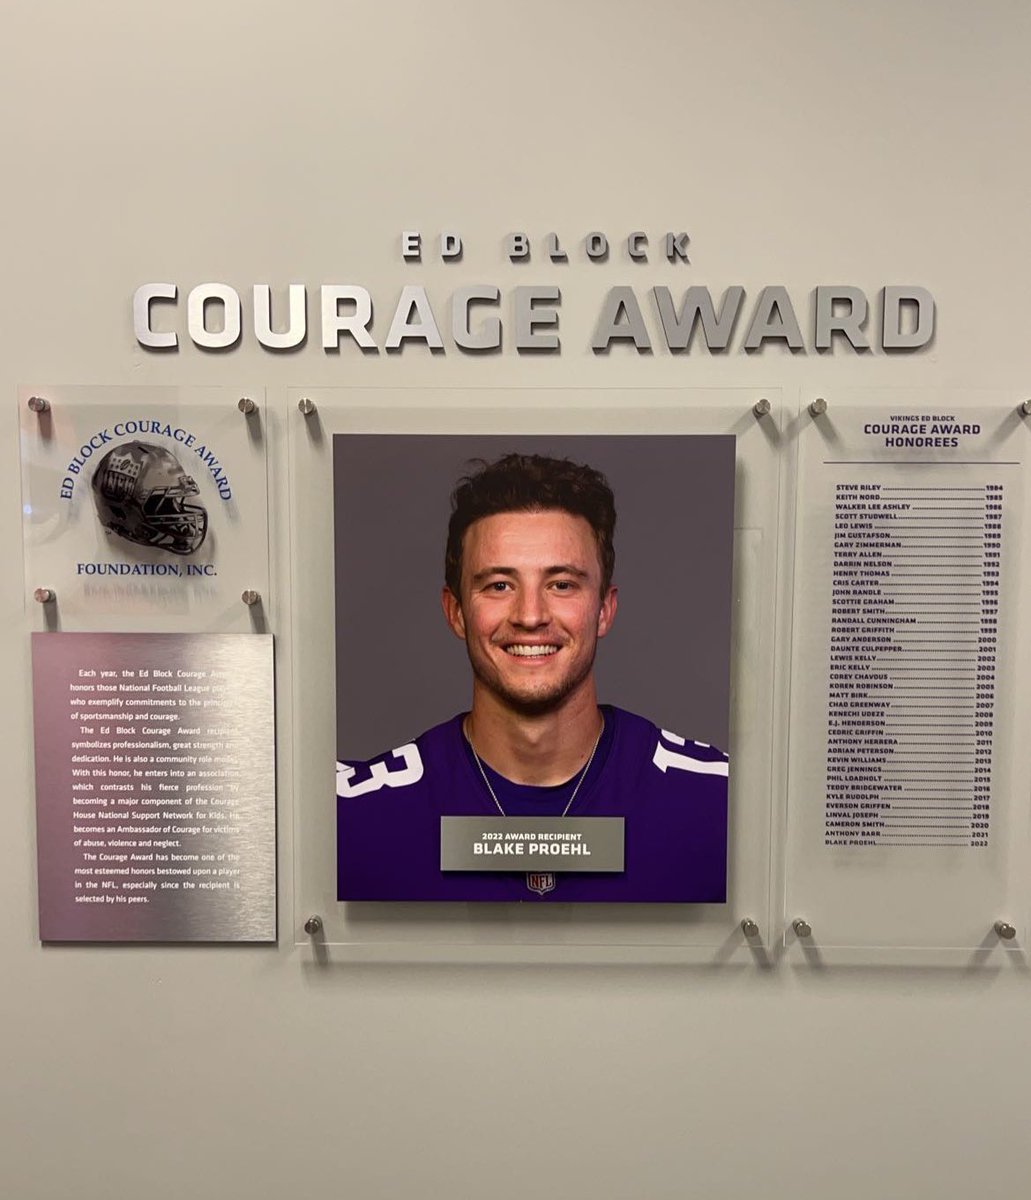 What an honor. What a journey. The toughest year of my life. Without my trainers, doctors, teammates, and family… I wouldn’t have made it. Their pictures deserve to be up there more than mine. Forever in their debt. Cheers to beating the odds. #SKOL